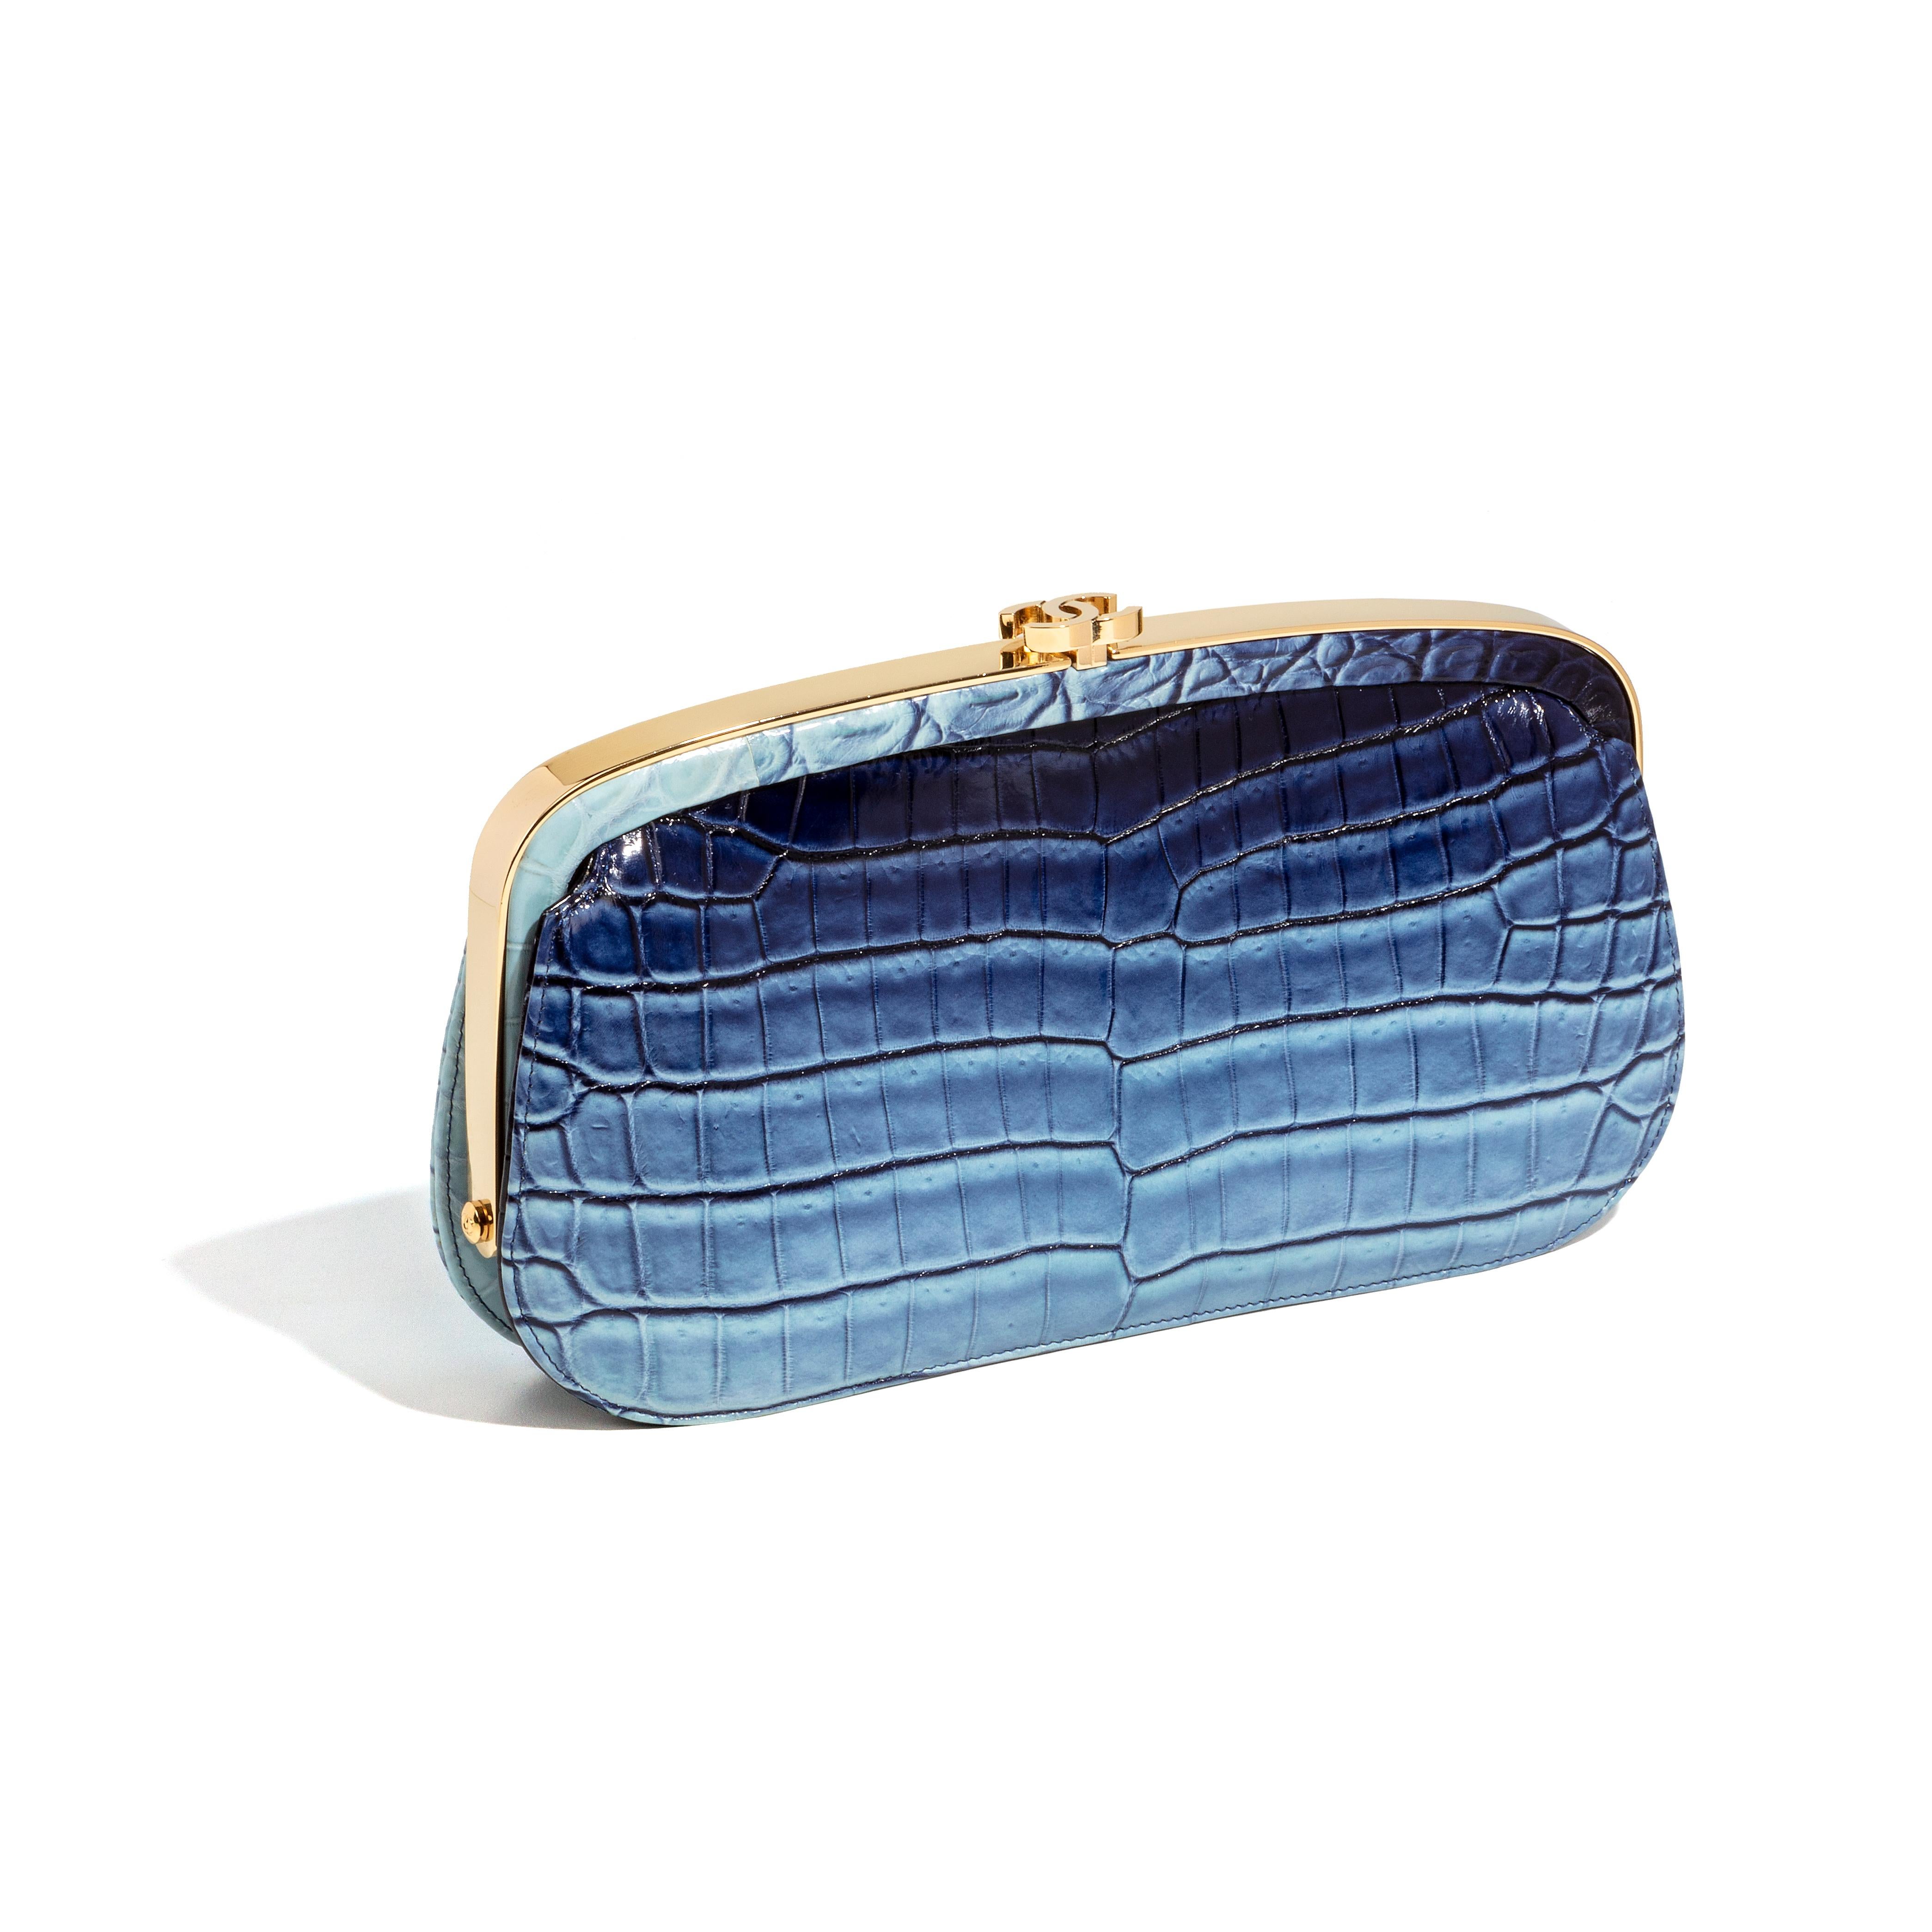 Chanel Blue Ombre Leather Clutch 3